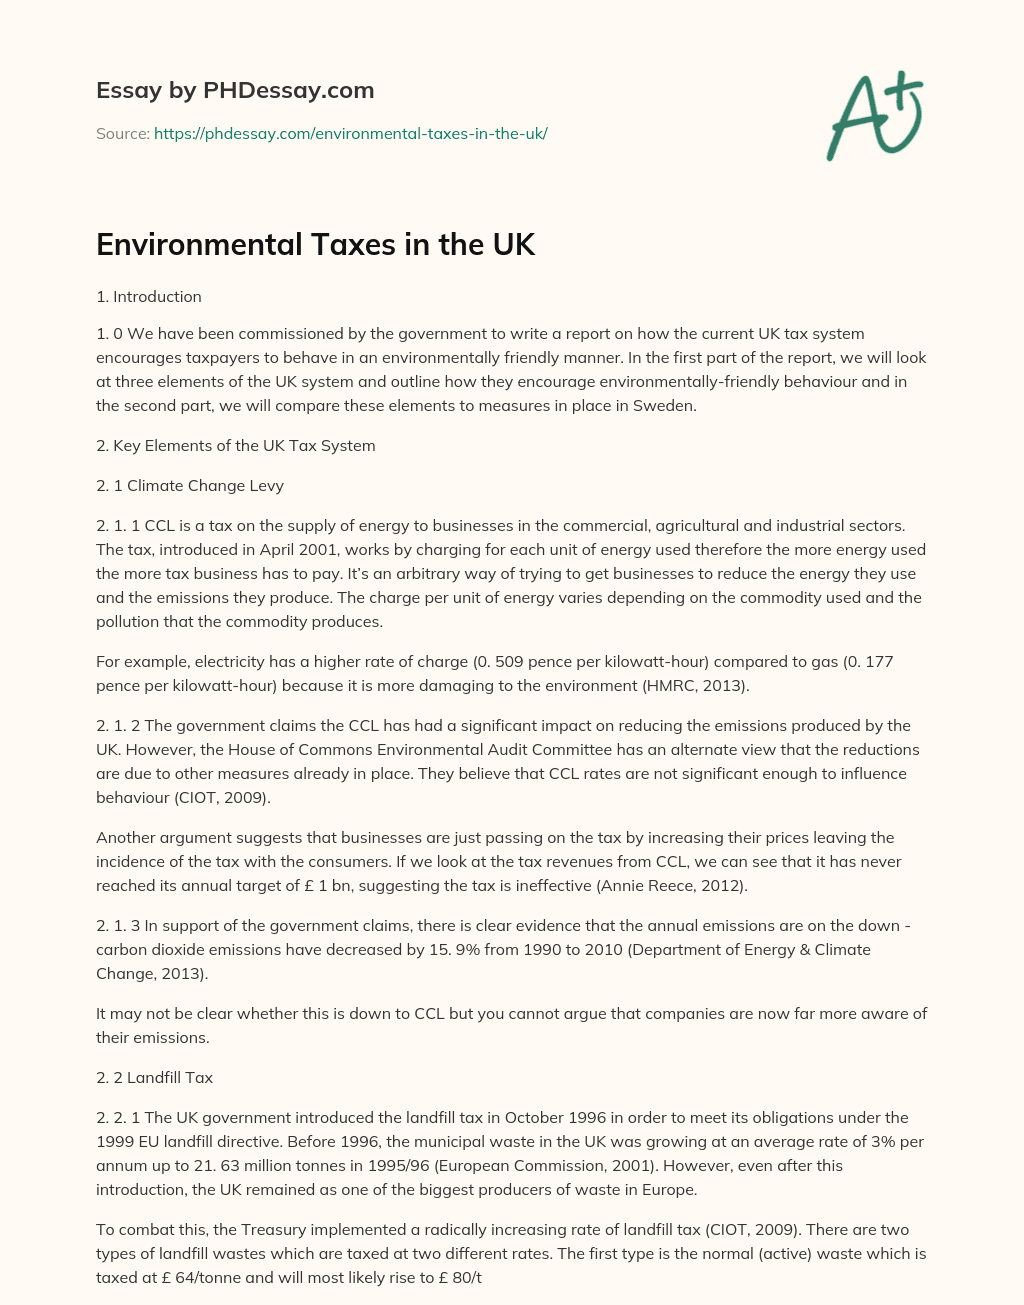 Environmental Taxes in the UK essay